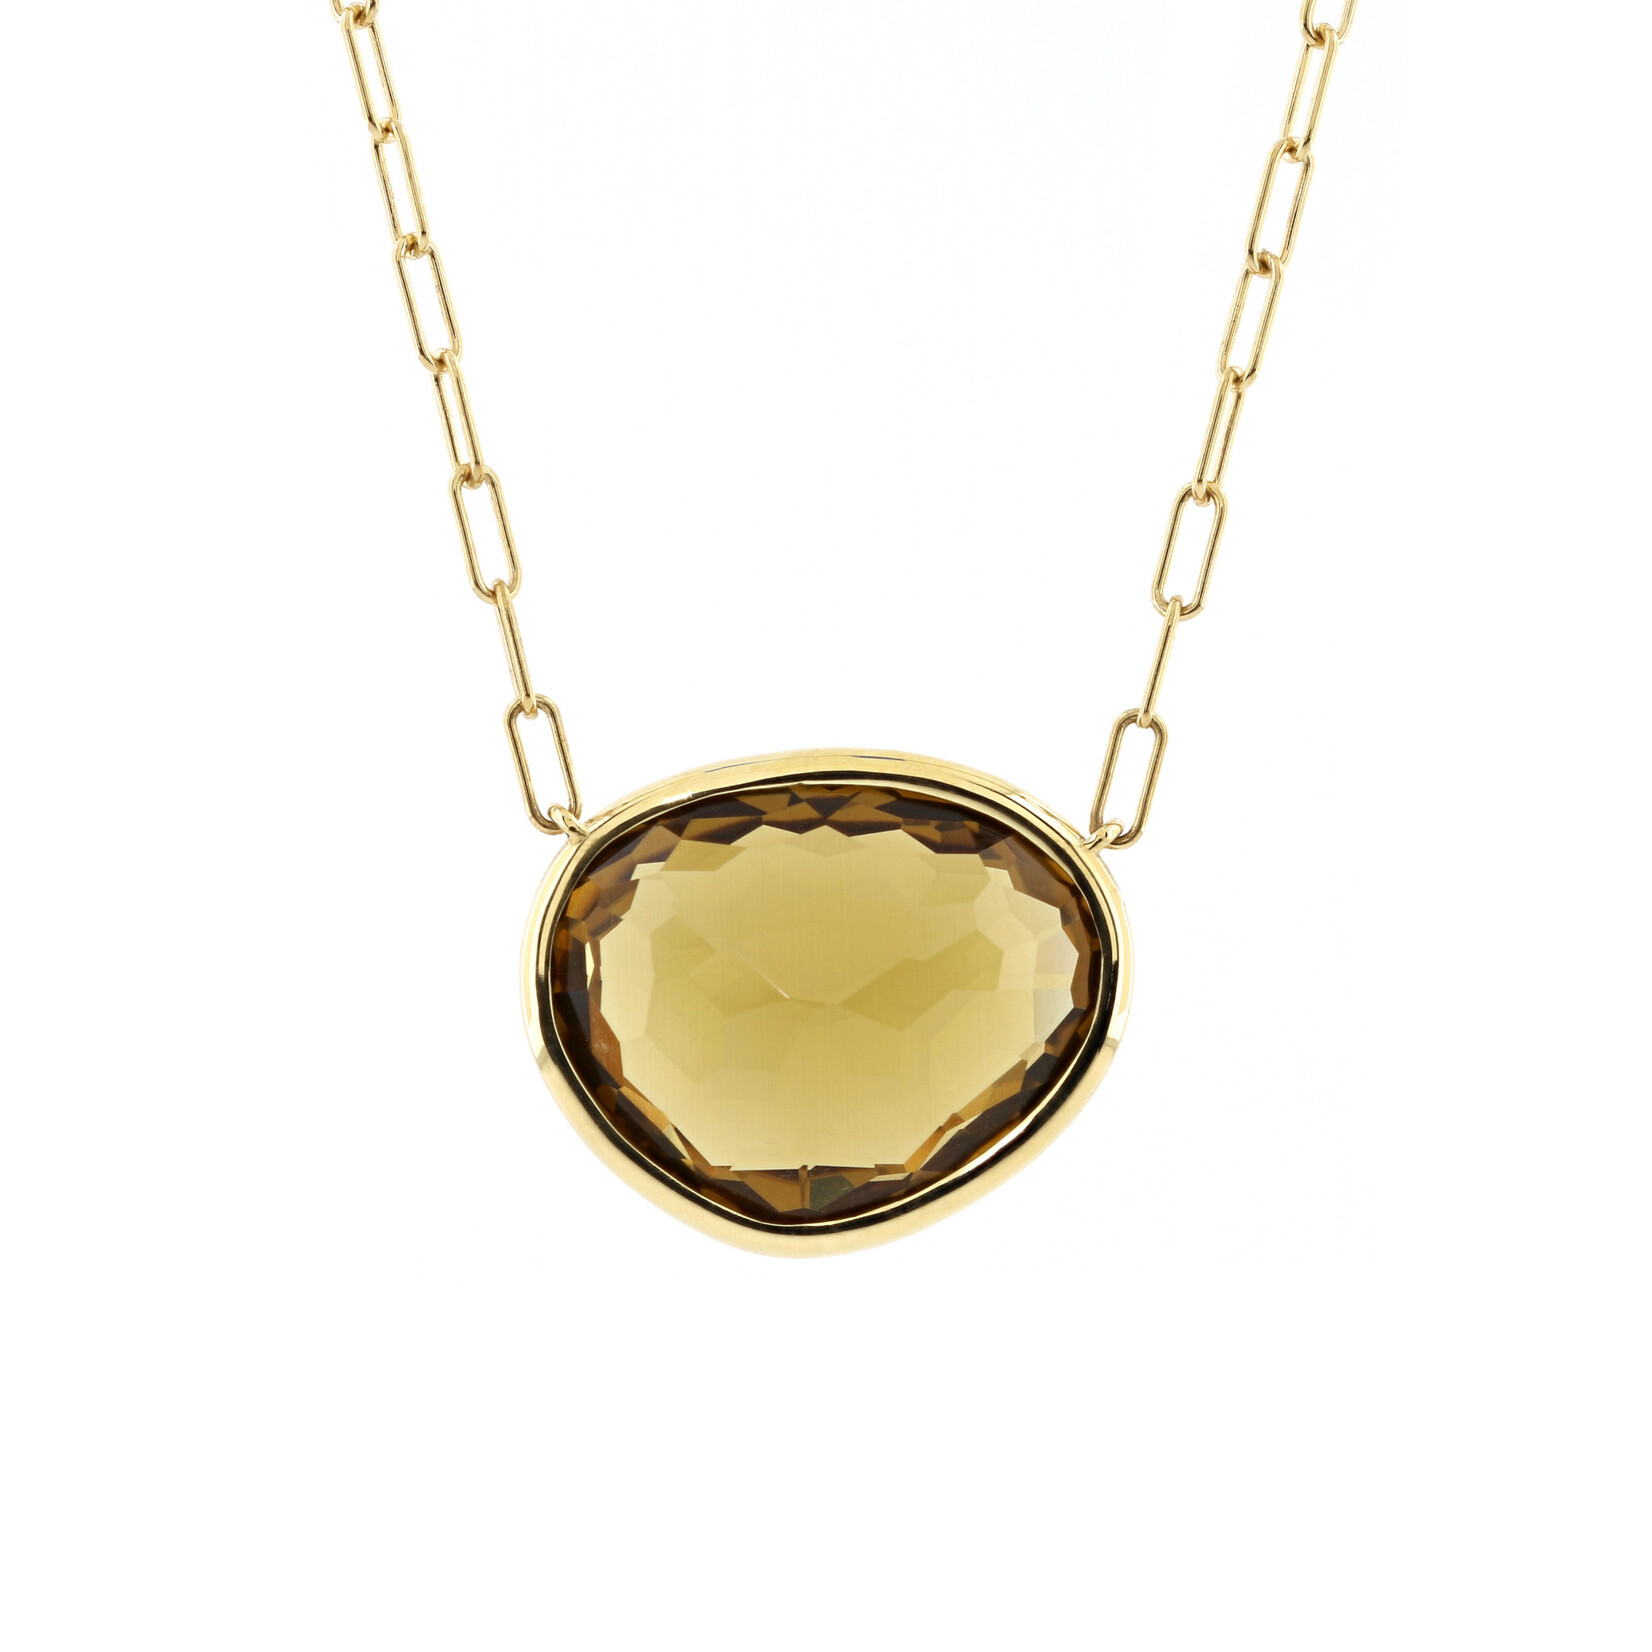 Baxter Moerman Large Piedras Necklace with Whiskey Quartz